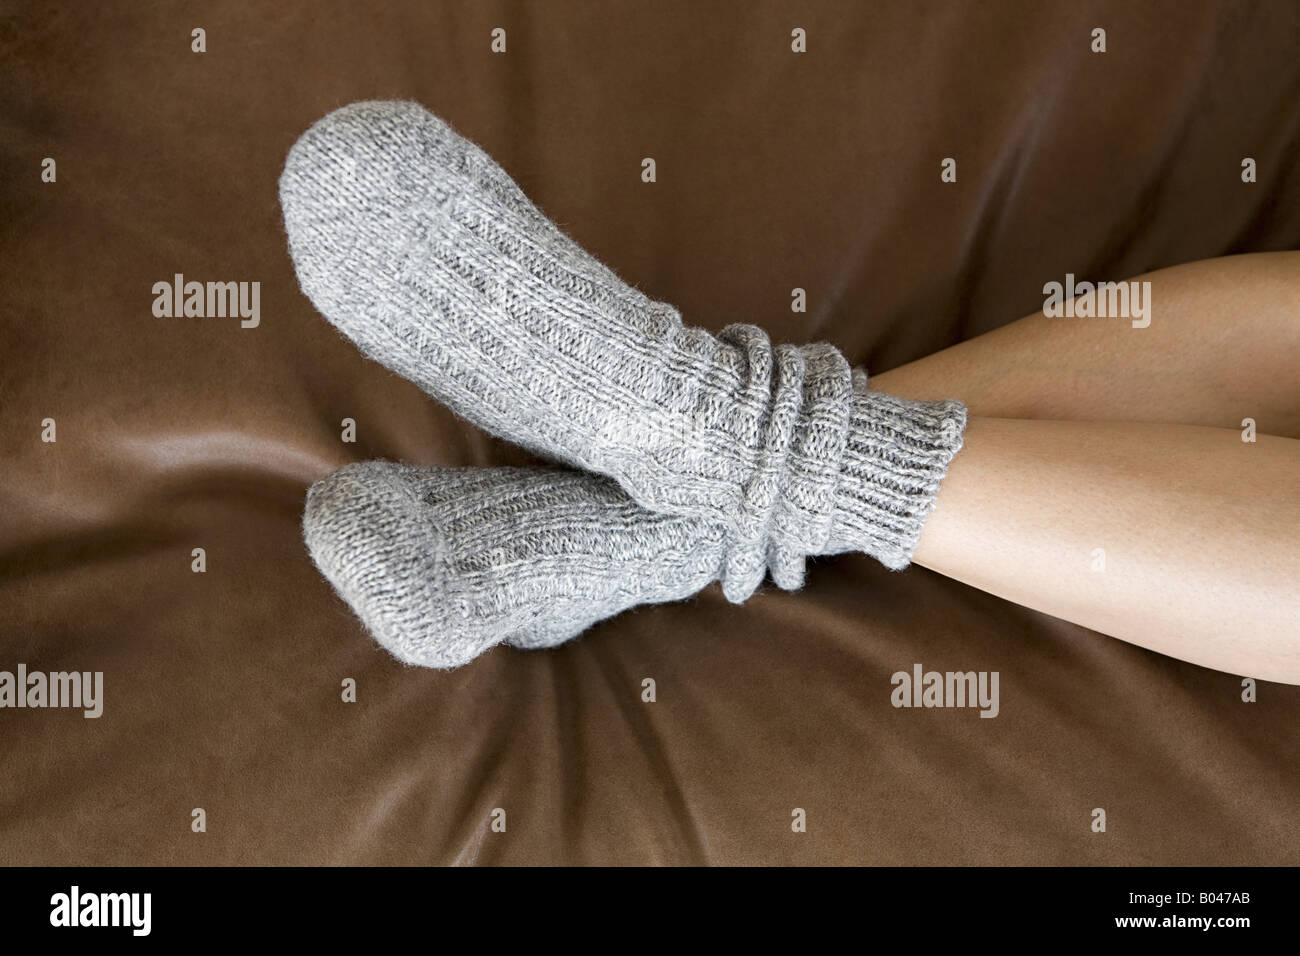 Wearing Socks High Resolution Stock Photography and Images - Alamy